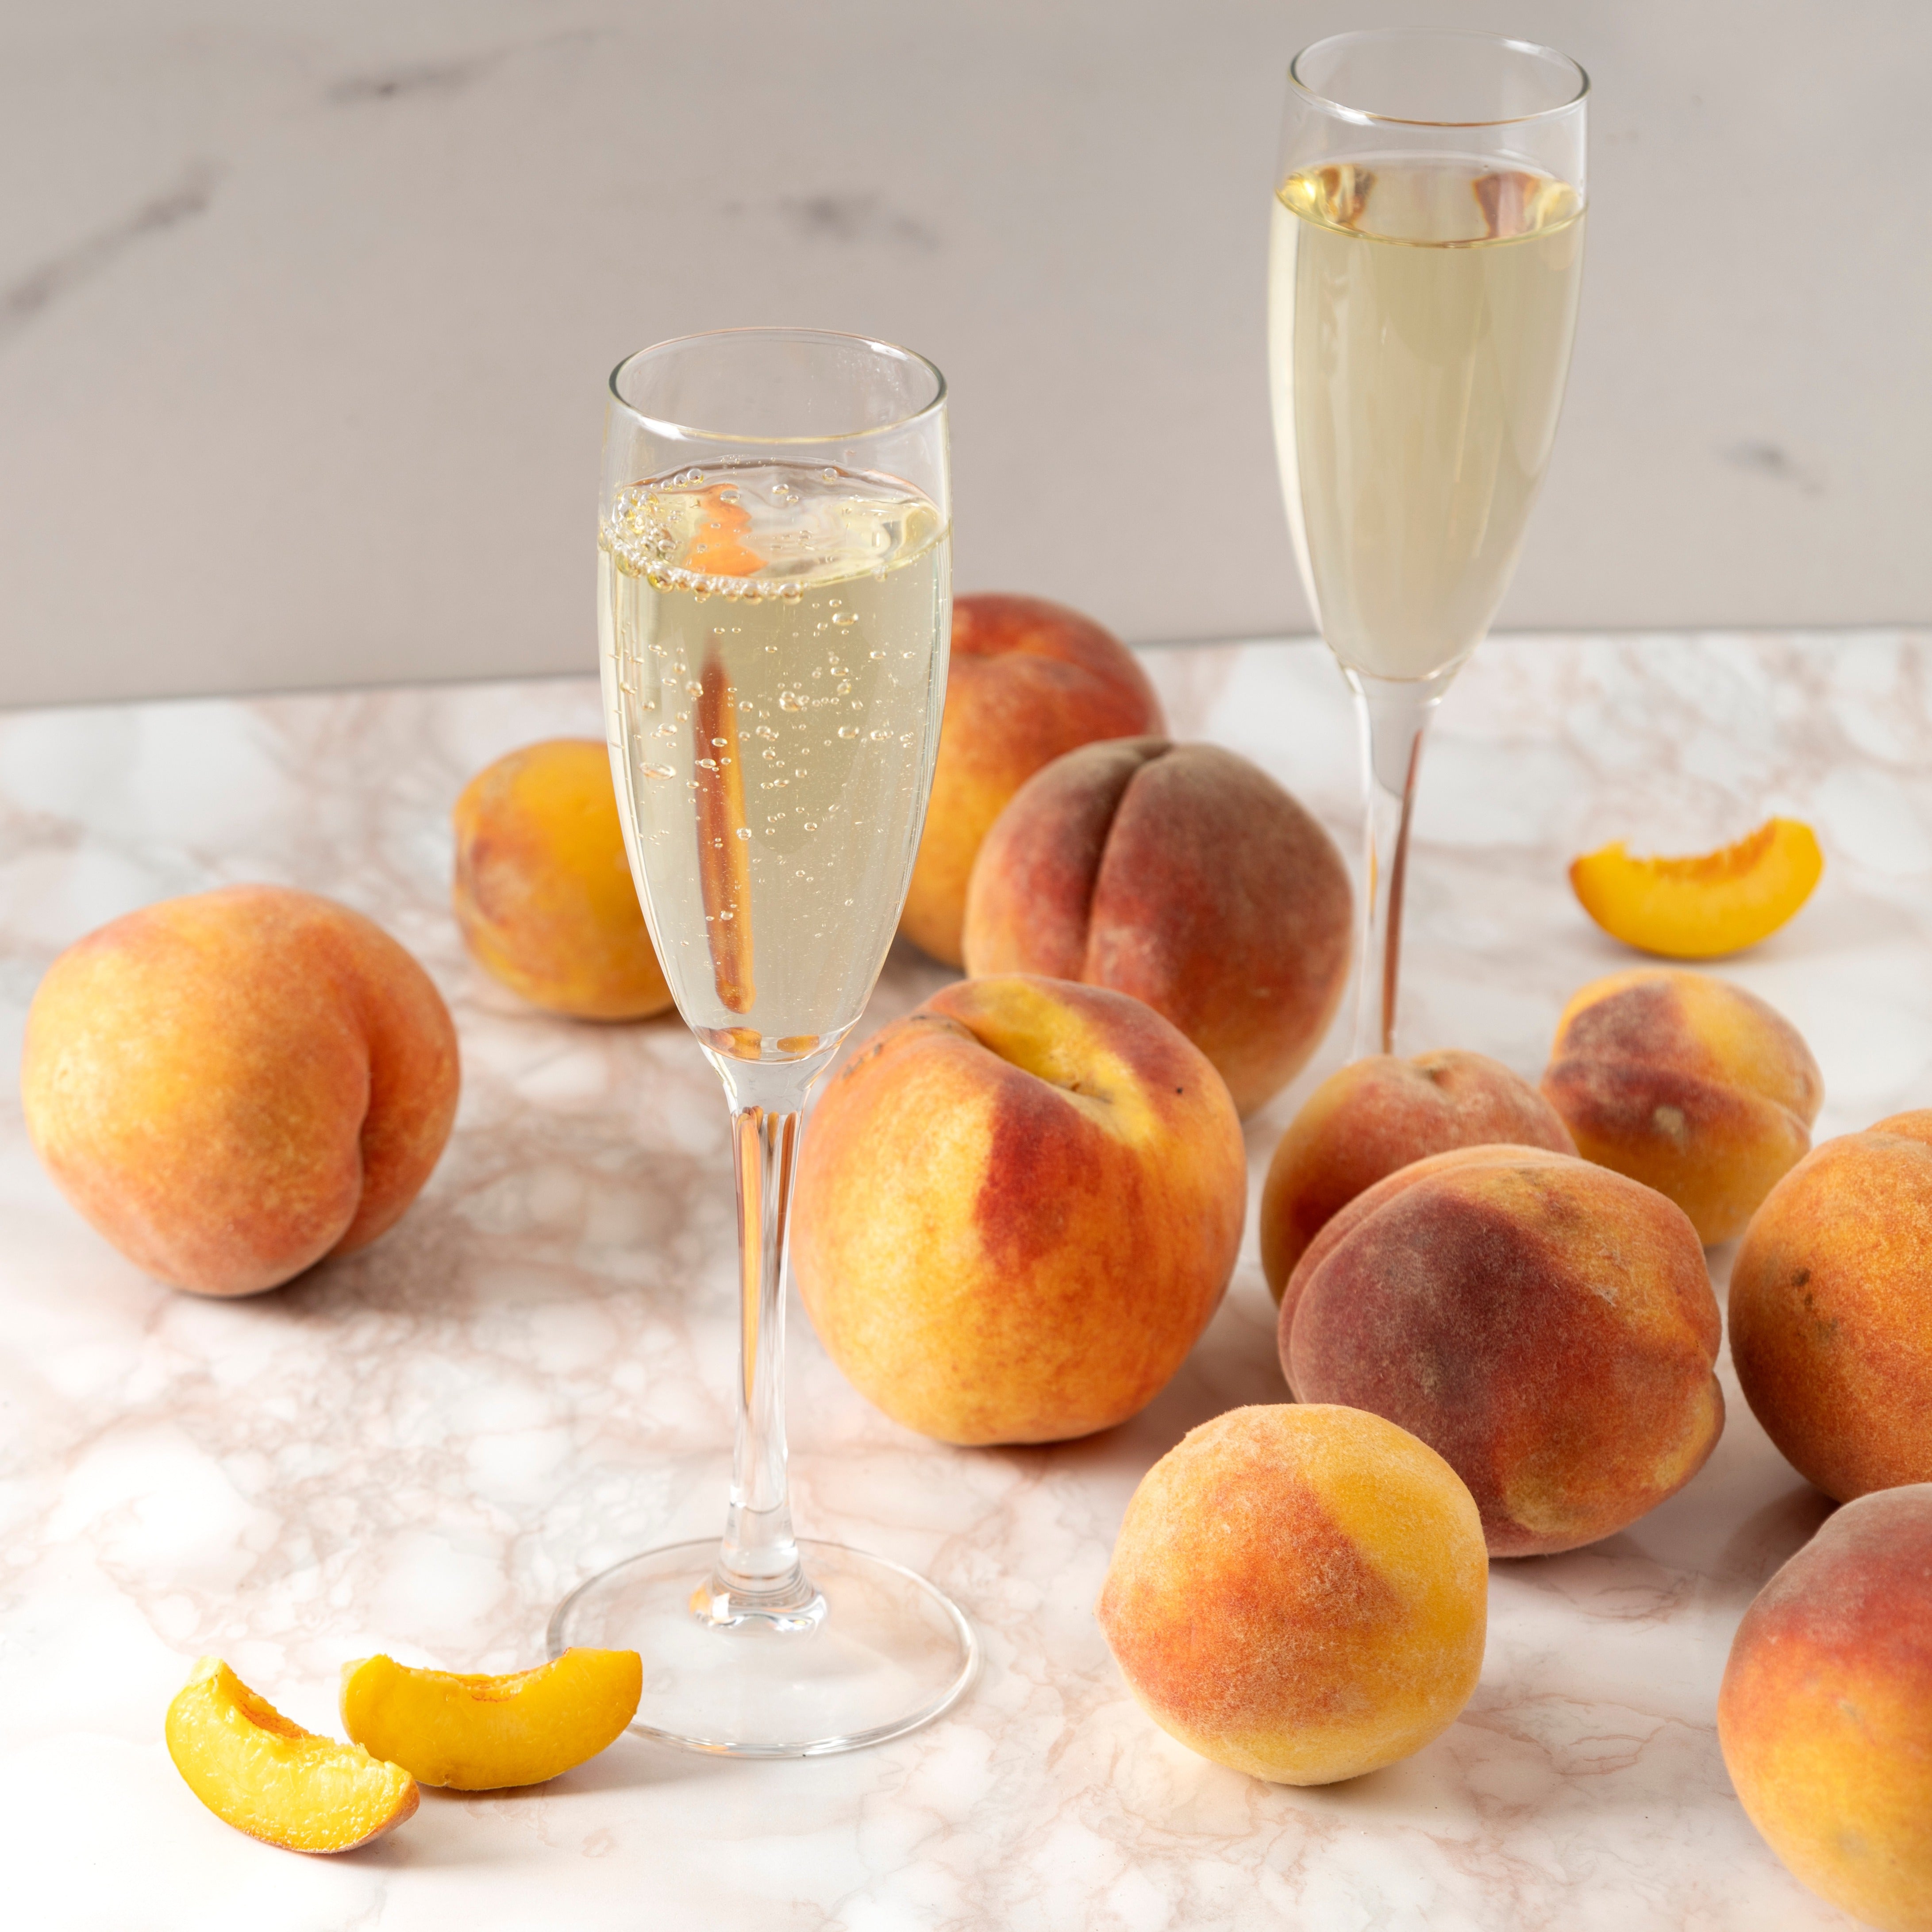 A Peach Prosecco scented wax melt bar, released by Tuscany Candle®, releasing sweet fragrance notes, sitting alongside a scented candle on a marble table.